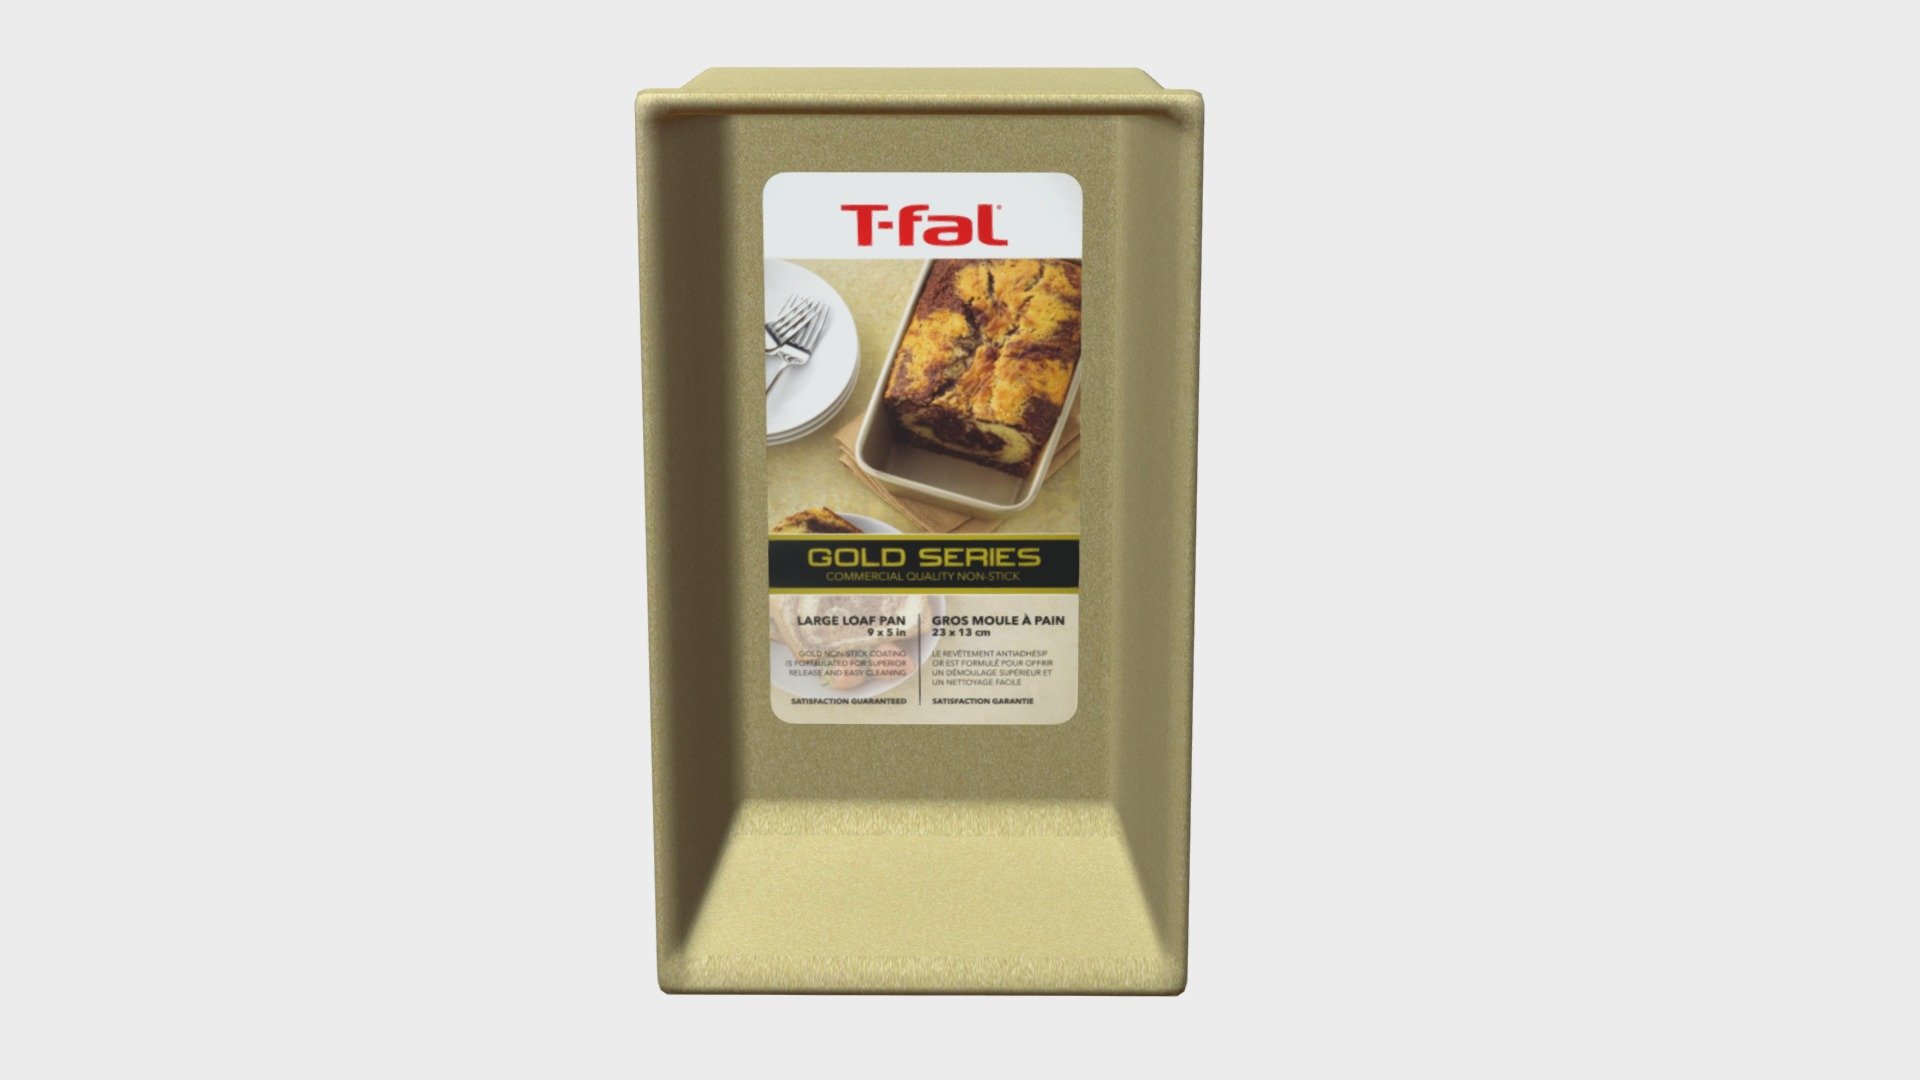 T-Fal Gold Series